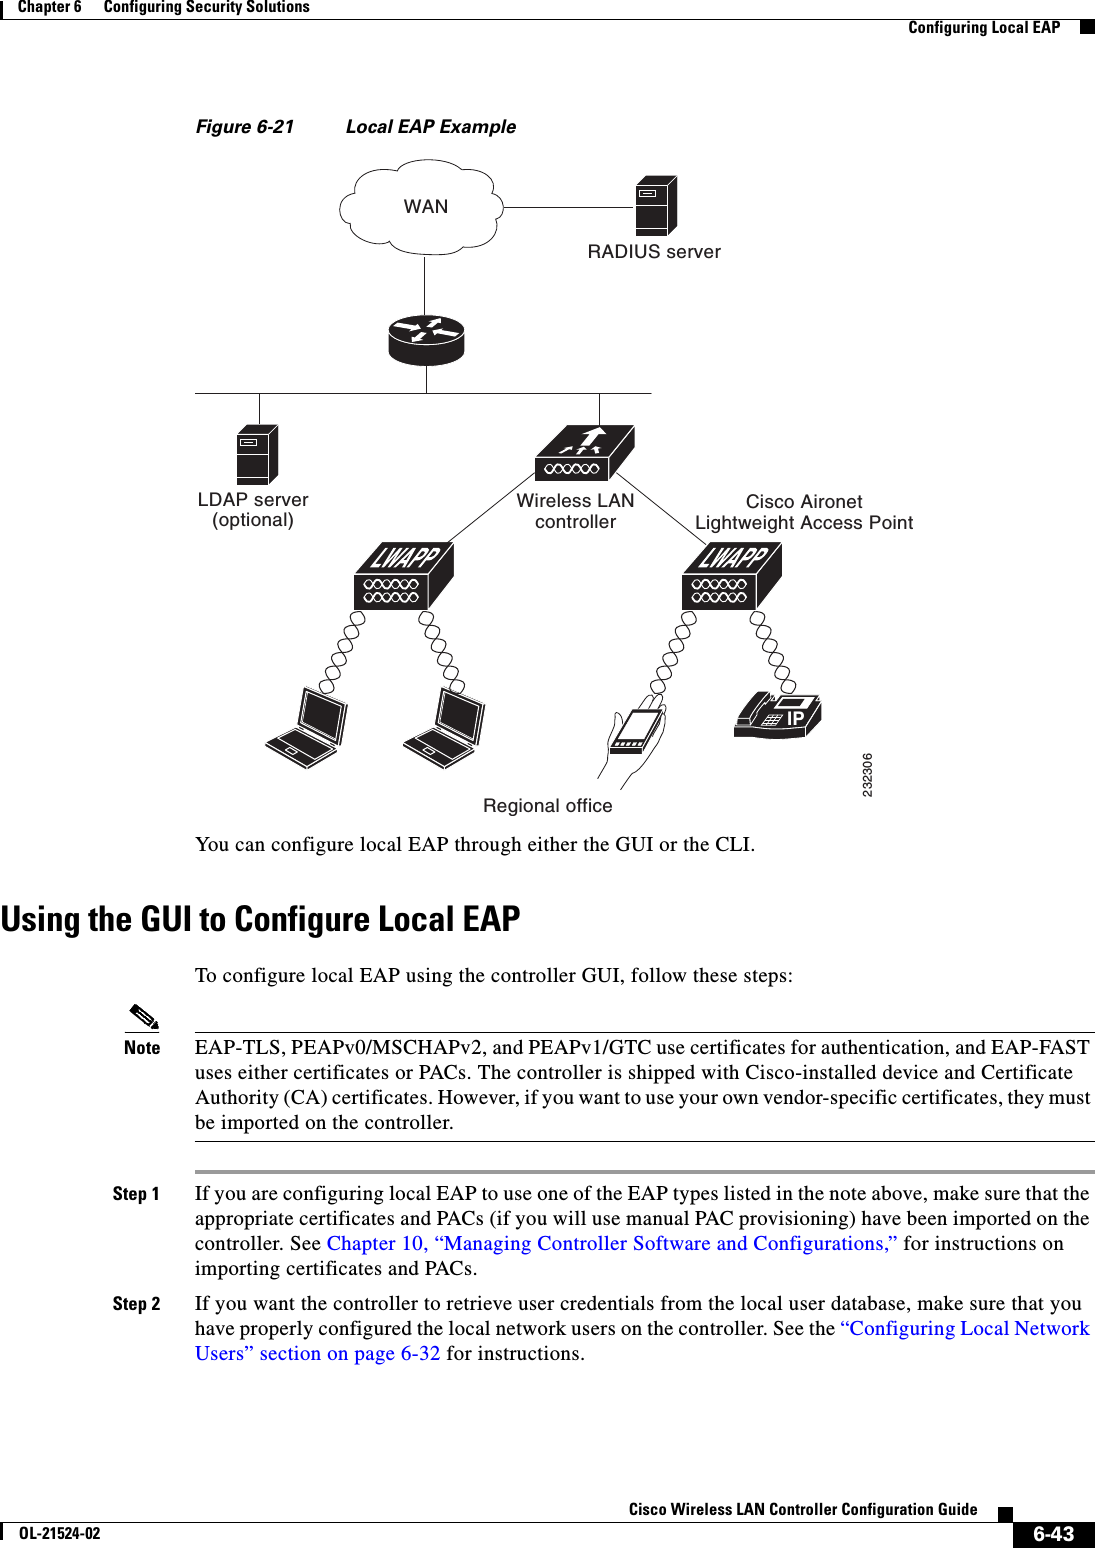  6-43Cisco Wireless LAN Controller Configuration GuideOL-21524-02Chapter 6      Configuring Security Solutions  Configuring Local EAPFigure 6-21 Local EAP ExampleYou can configure local EAP through either the GUI or the CLI.Using the GUI to Configure Local EAPTo configure local EAP using the controller GUI, follow these steps:Note EAP-TLS, PEAPv0/MSCHAPv2, and PEAPv1/GTC use certificates for authentication, and EAP-FAST uses either certificates or PACs. The controller is shipped with Cisco-installed device and Certificate Authority (CA) certificates. However, if you want to use your own vendor-specific certificates, they must be imported on the controller. Step 1 If you are configuring local EAP to use one of the EAP types listed in the note above, make sure that the appropriate certificates and PACs (if you will use manual PAC provisioning) have been imported on the controller. See Chapter 10, “Managing Controller Software and Configurations,” for instructions on importing certificates and PACs.Step 2 If you want the controller to retrieve user credentials from the local user database, make sure that you have properly configured the local network users on the controller. See the “Configuring Local Network Users” section on page 6-32 for instructions.IPLDAP server(optional)Wireless LANcontrollerCisco AironetLightweight Access PointRegional officeRADIUS serverWAN232306